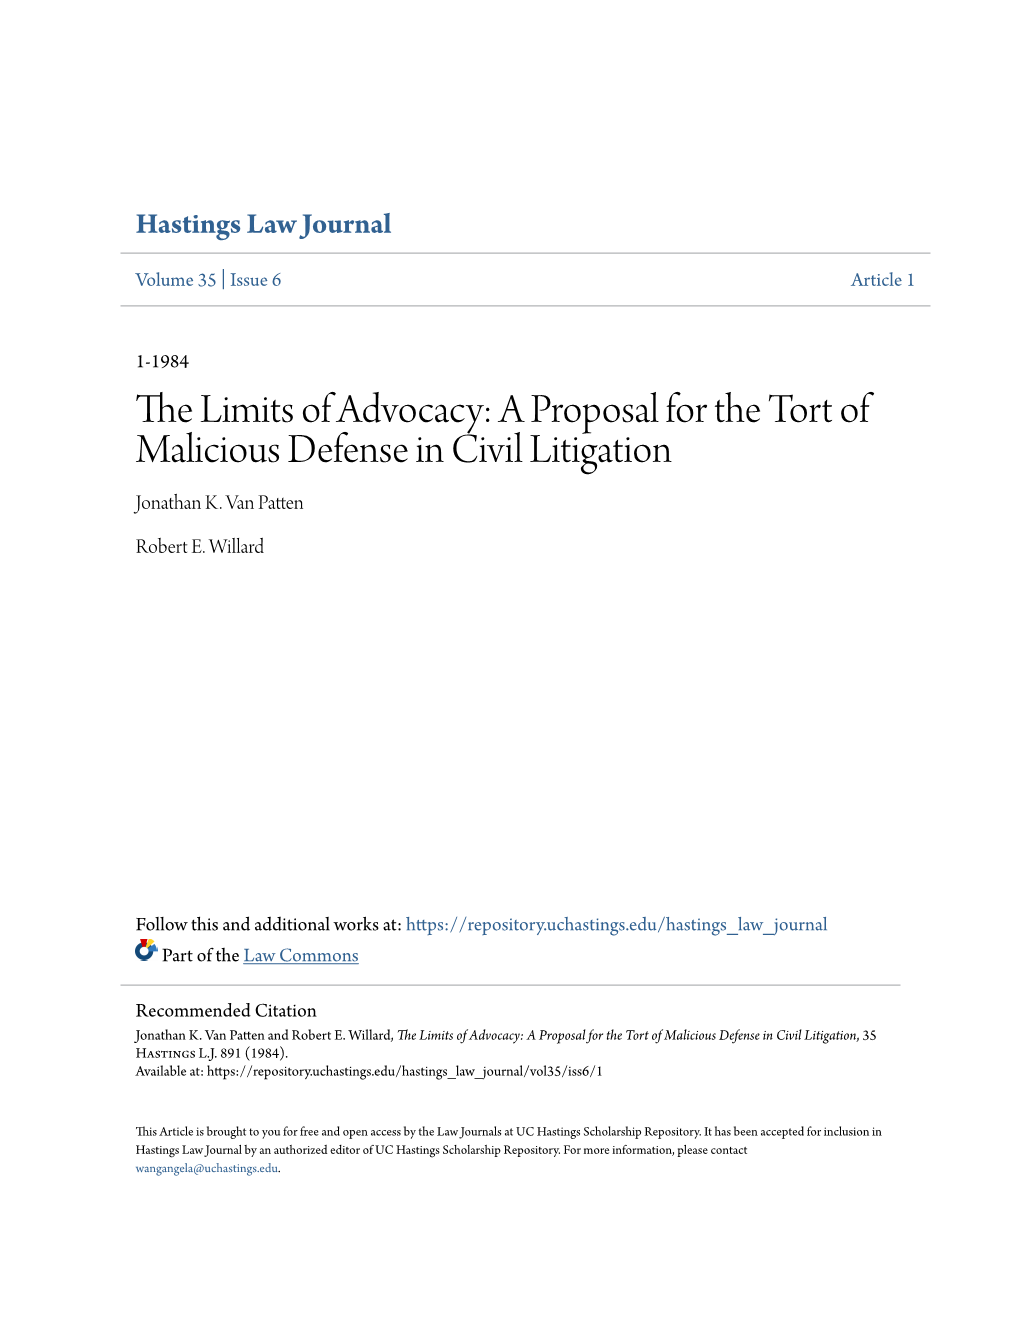 A Proposal for the Tort of Malicious Defense in Civil Litigation Jonathan K